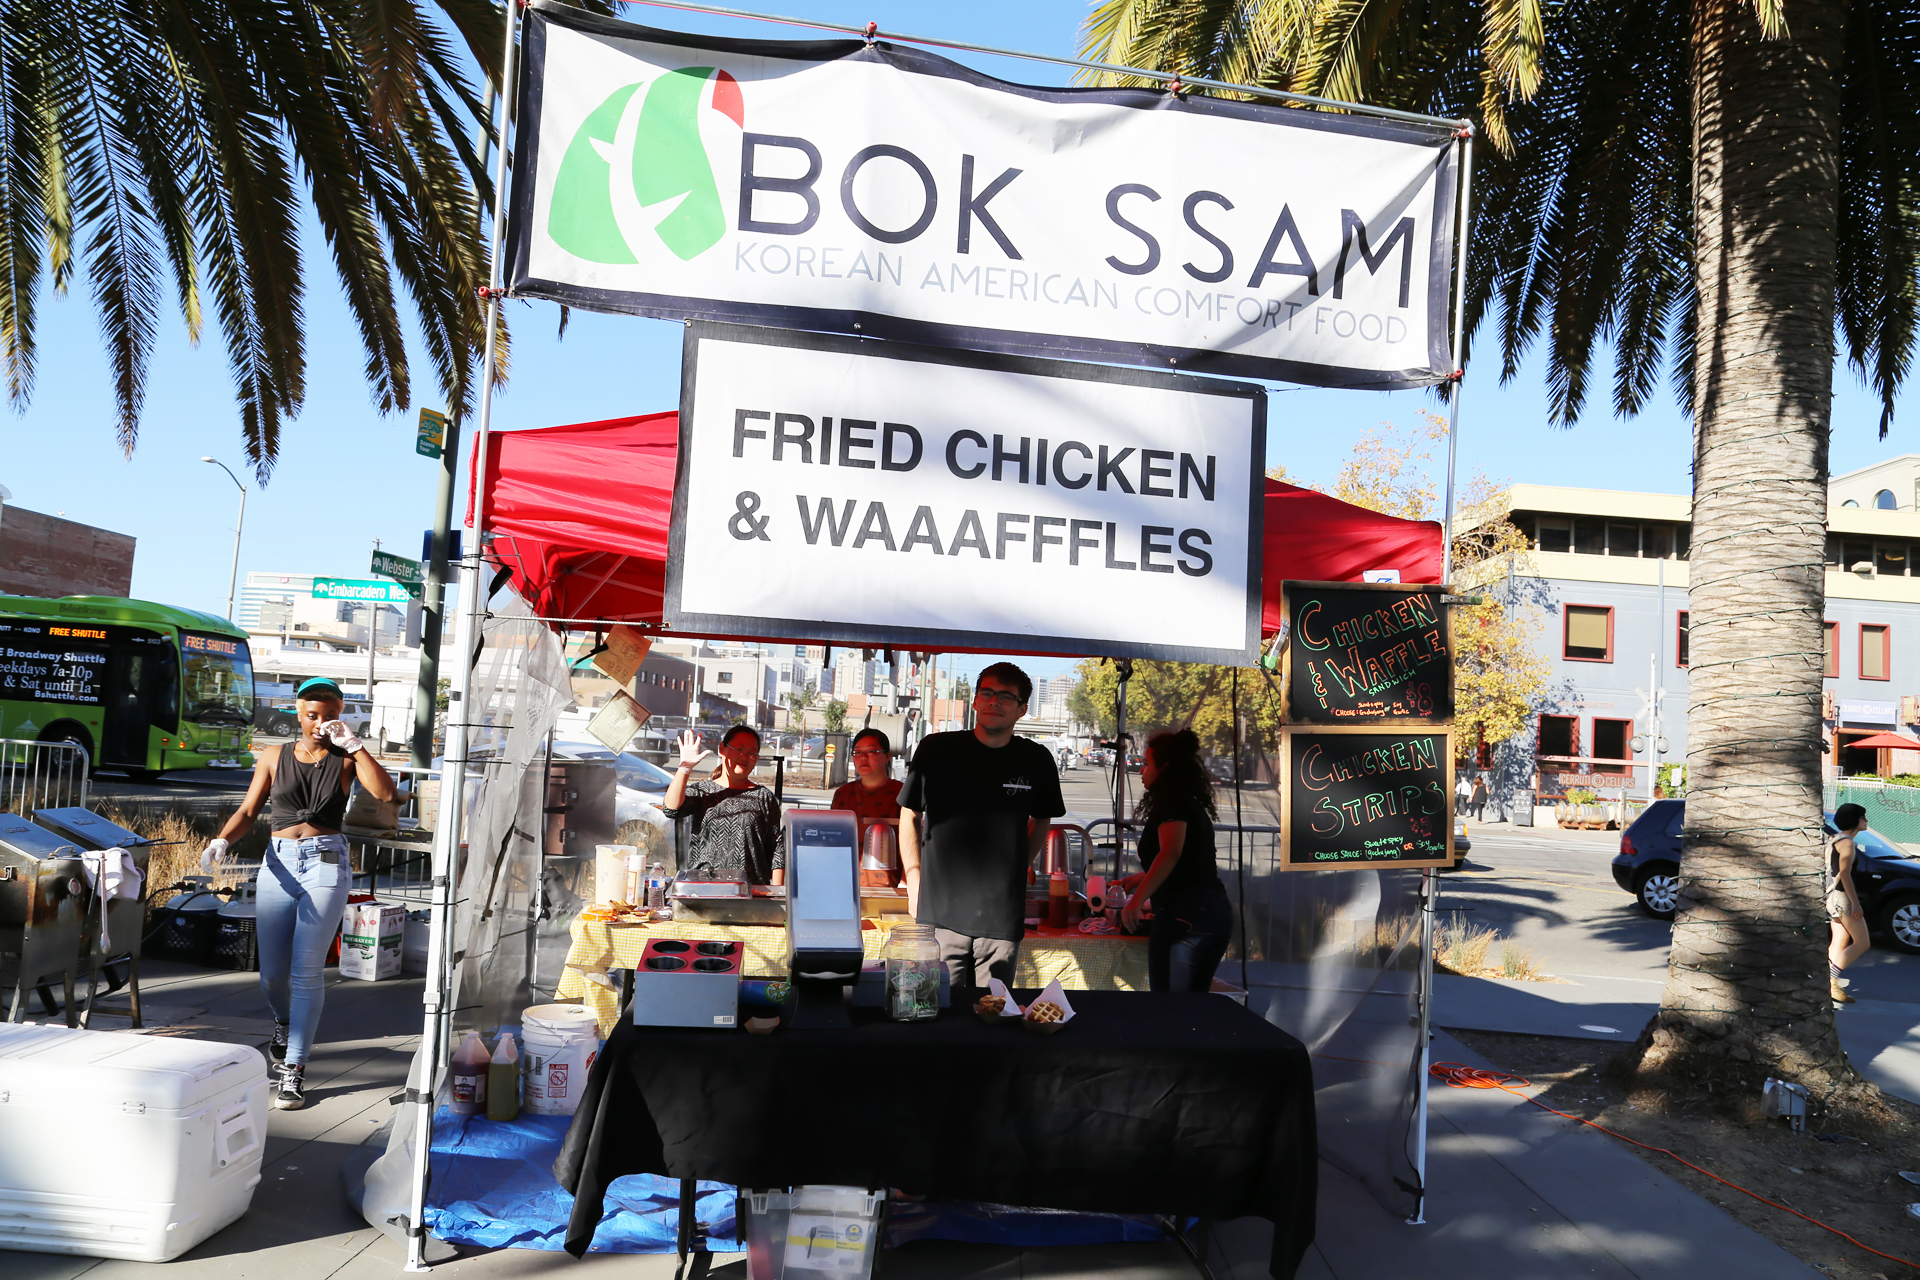 BOK SSAM booth